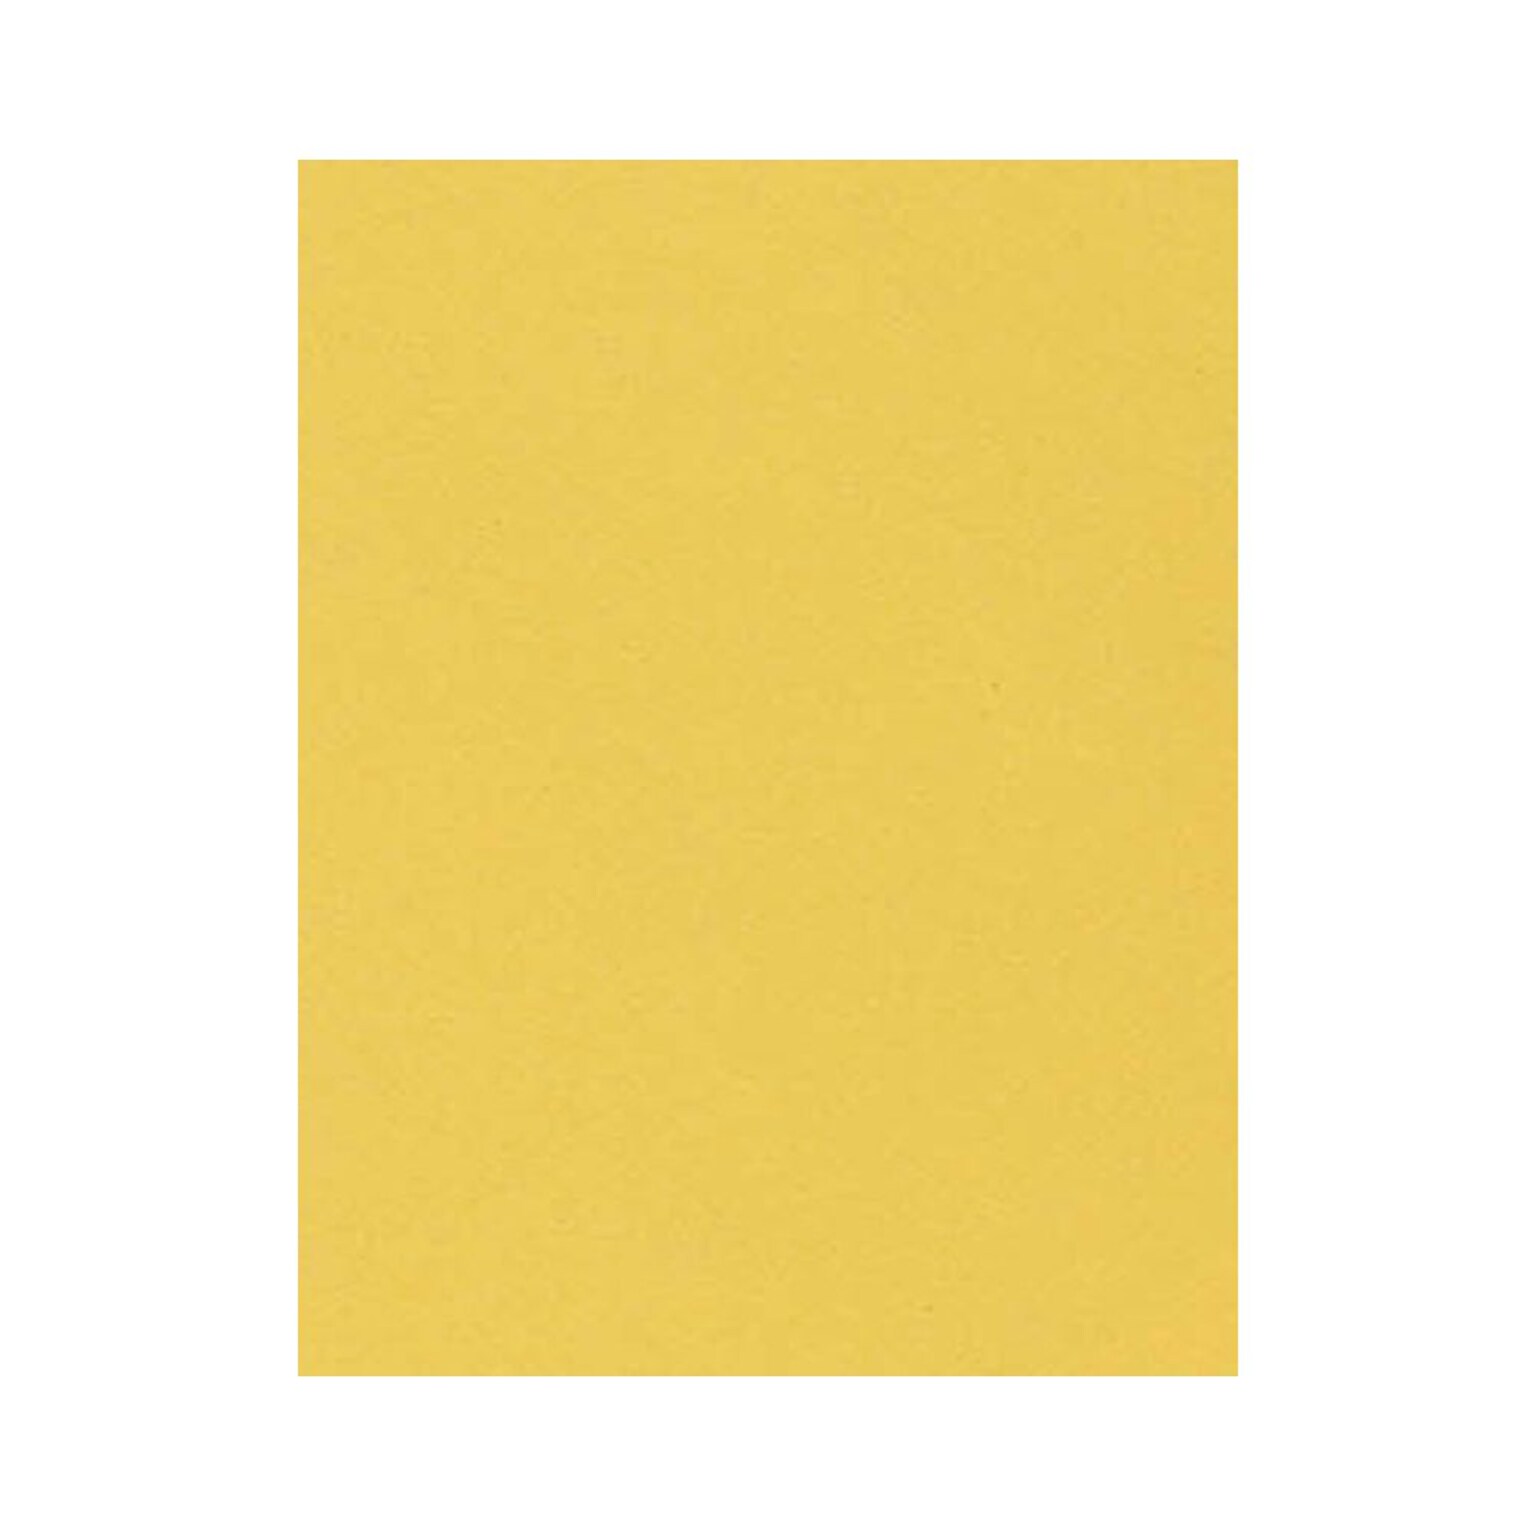 LUX 8.5 x 11 Business Paper, 28 lbs., Goldenrod Yellow, 50 Sheets/Pack (81211-P-43-50)